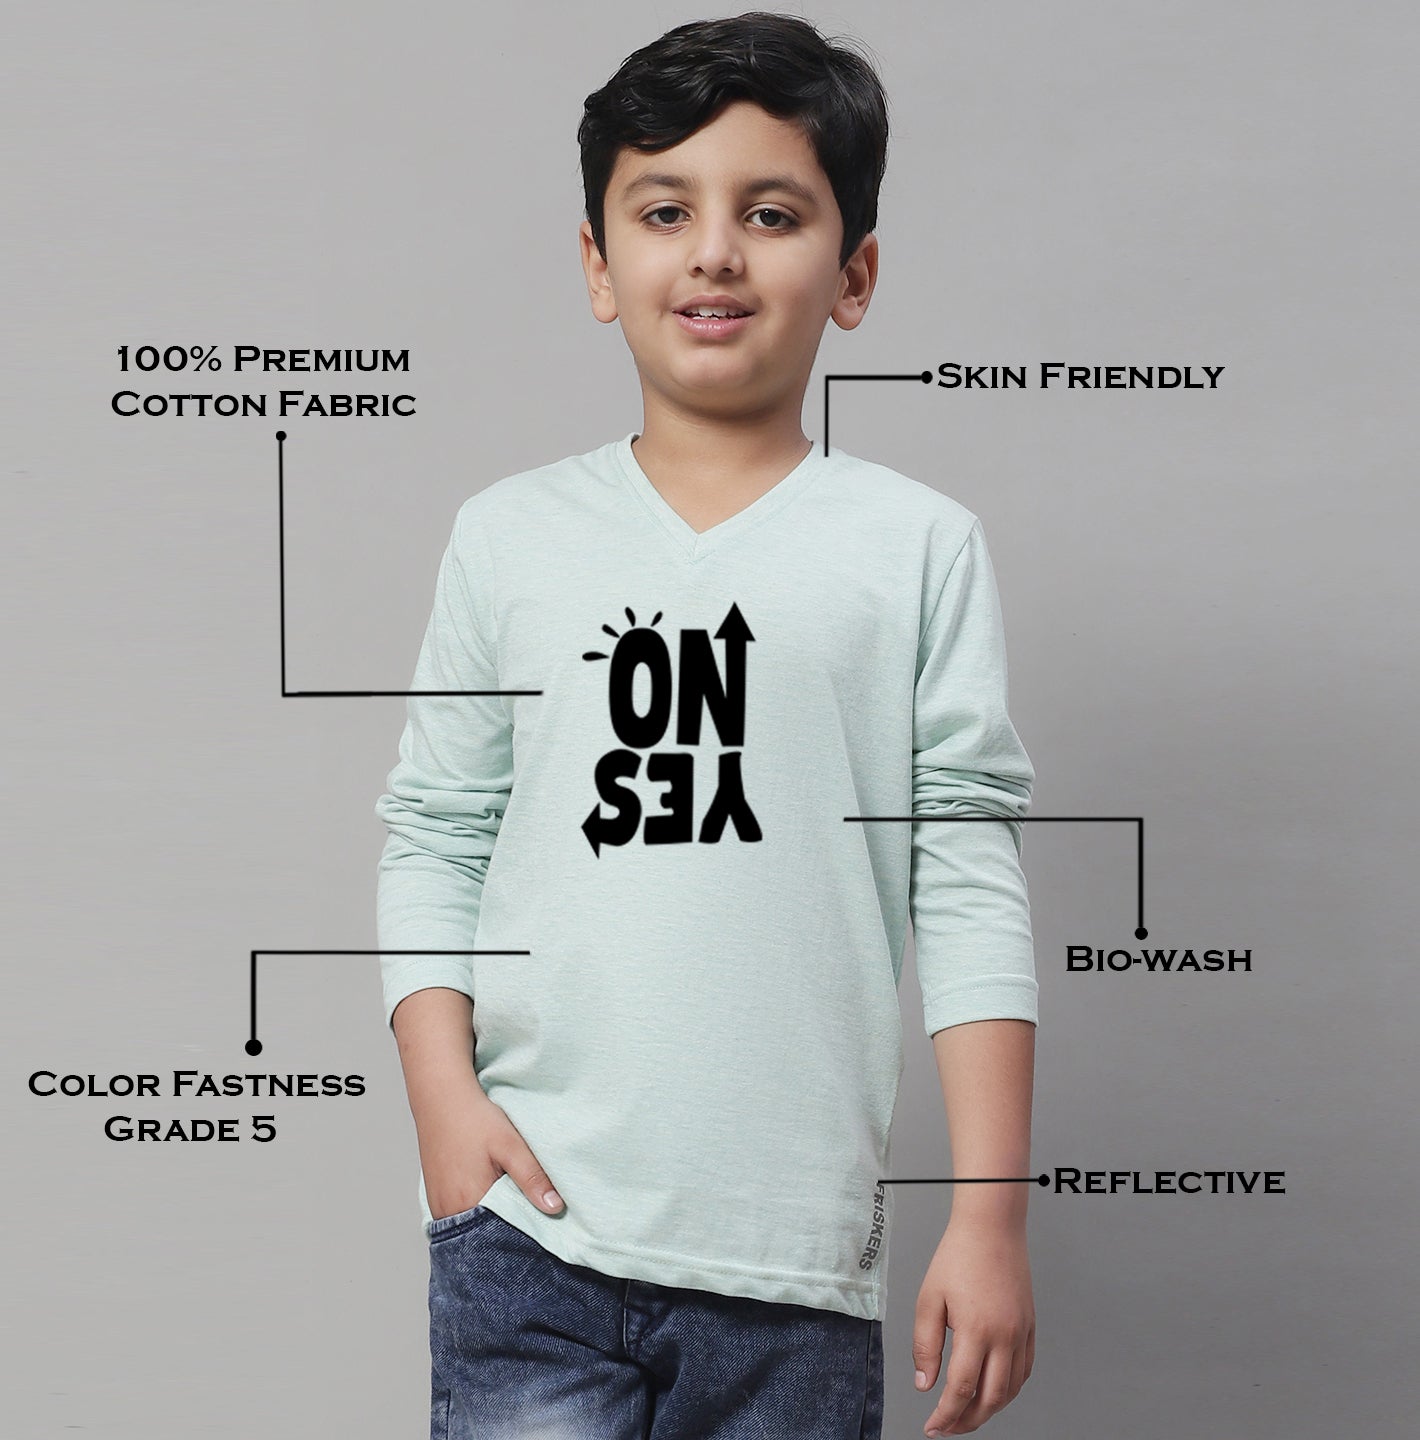 Boys No Yes Casual Fit Printed T-Shirt - Friskers